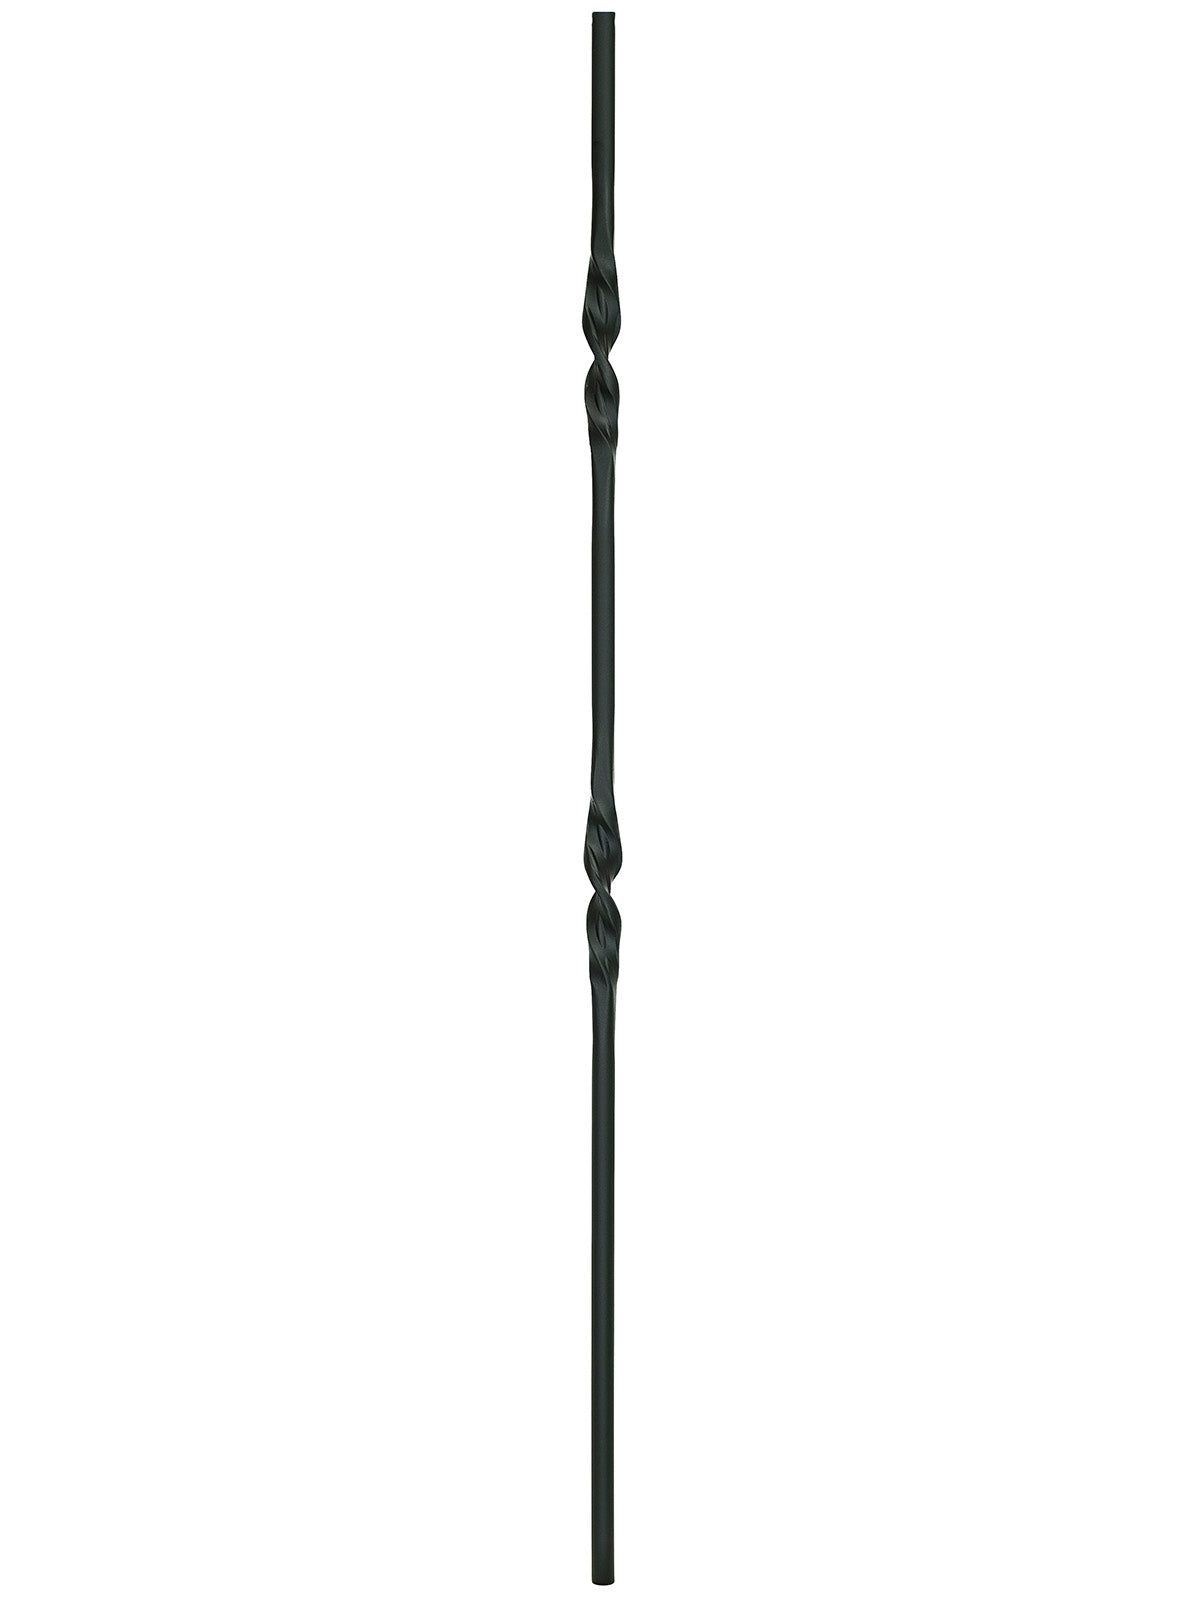 Iron Baluster 2GR07 - 5/8" Round - Double Ribbon